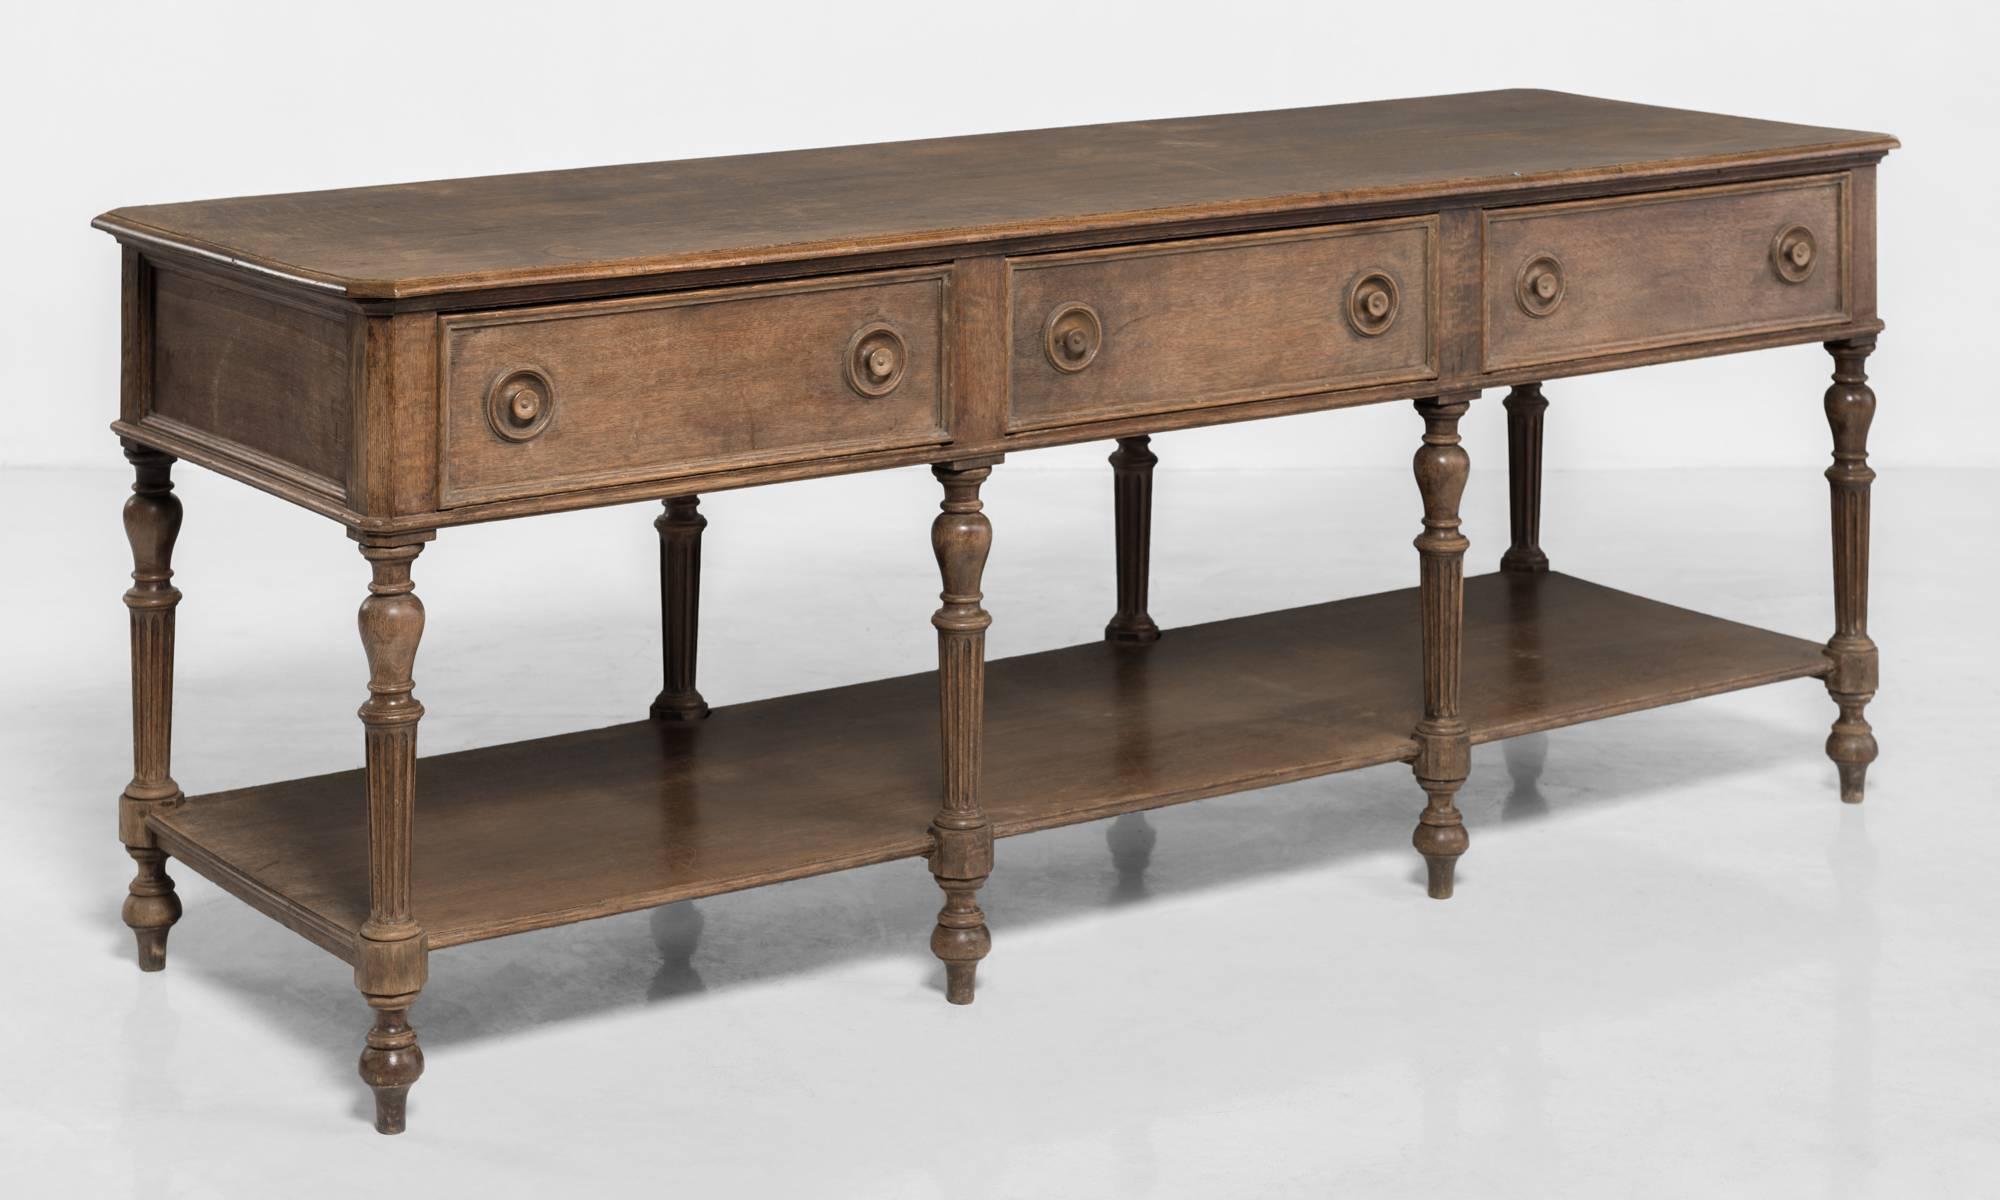 Carved oak drapers table, France, circa 1890.

Solid oak construction, with unique carved wooden knobs and legs.
